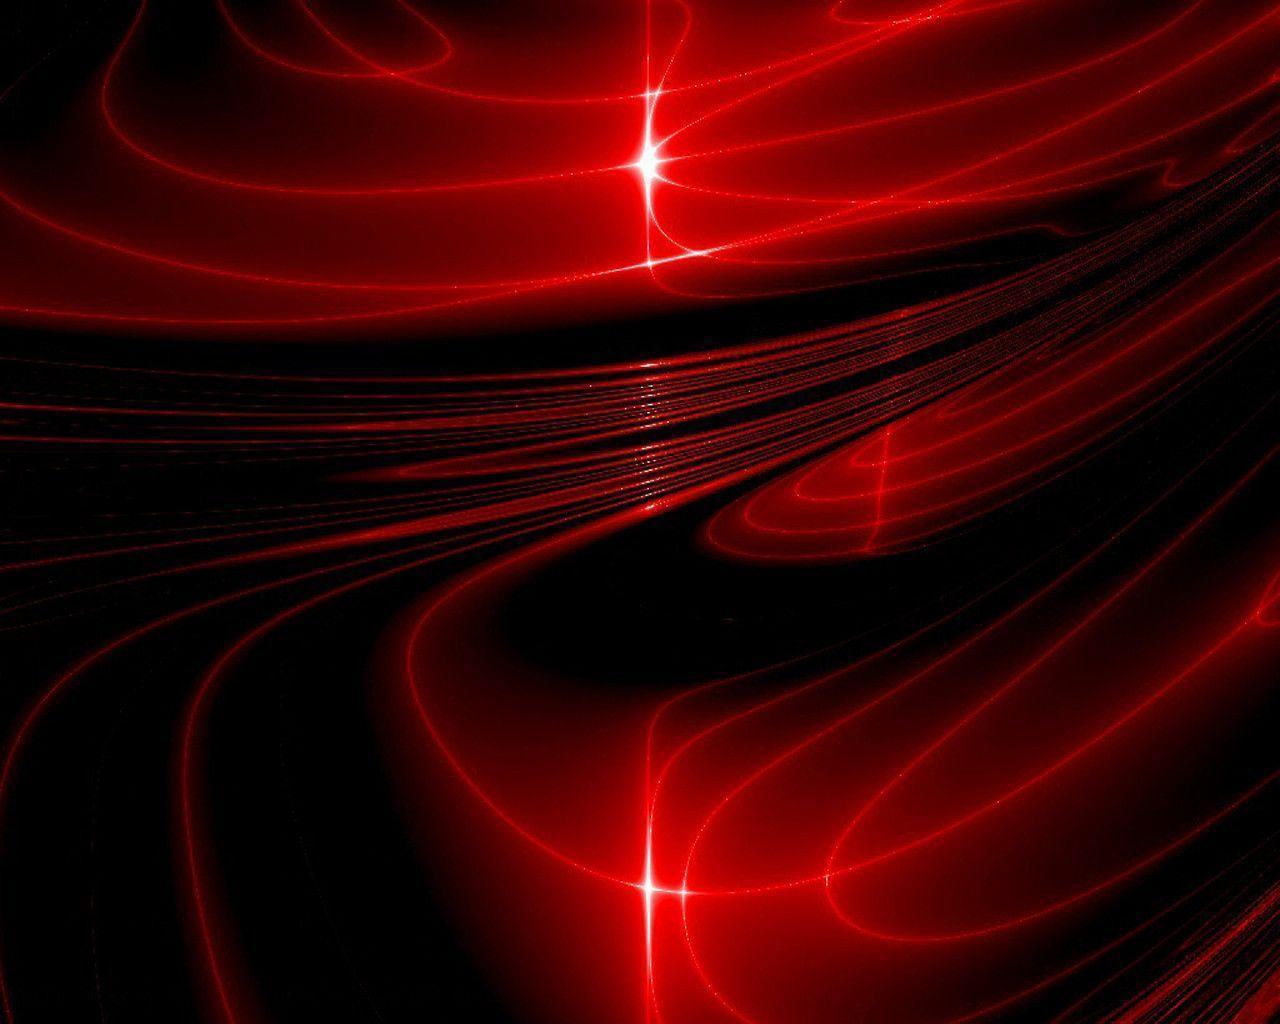 Cool Red Abstract Wallpaper photo of beautiful red abstract